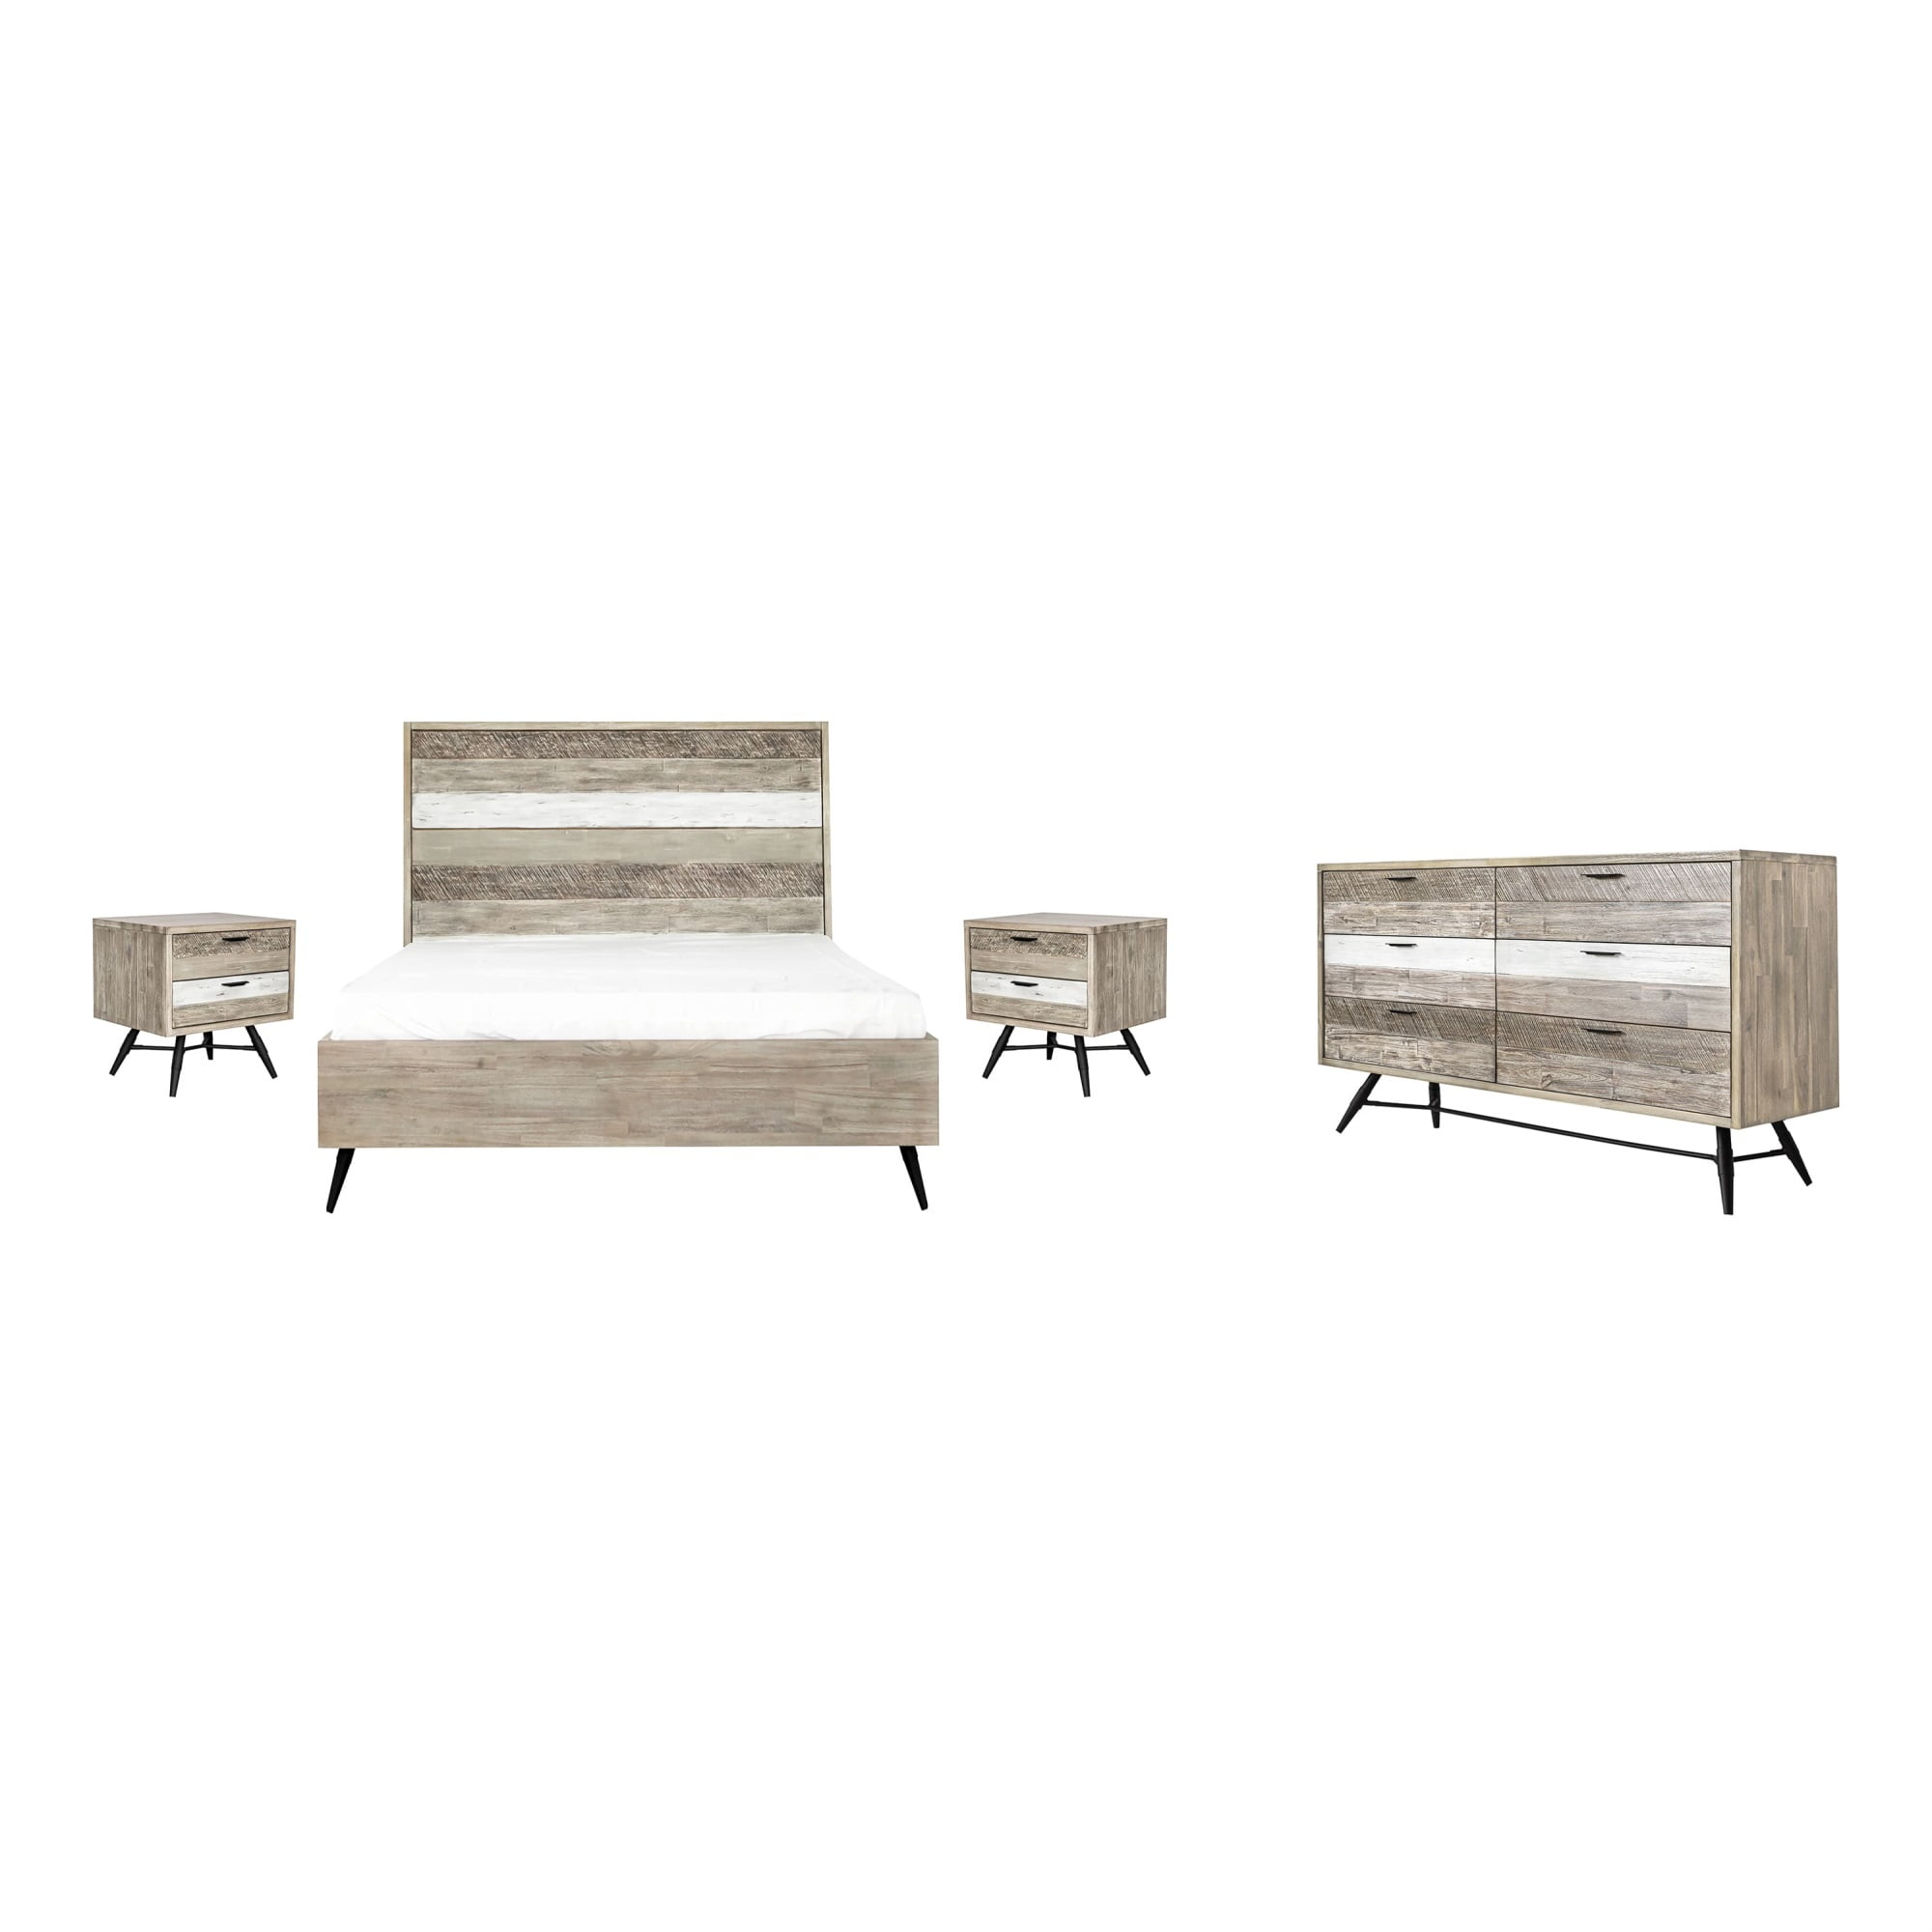 Picture of Armen Living SETBRBDQN4A Bridges Bedroom Set in Two-Tone Acacia Wood - Queen Size - 4 Piece